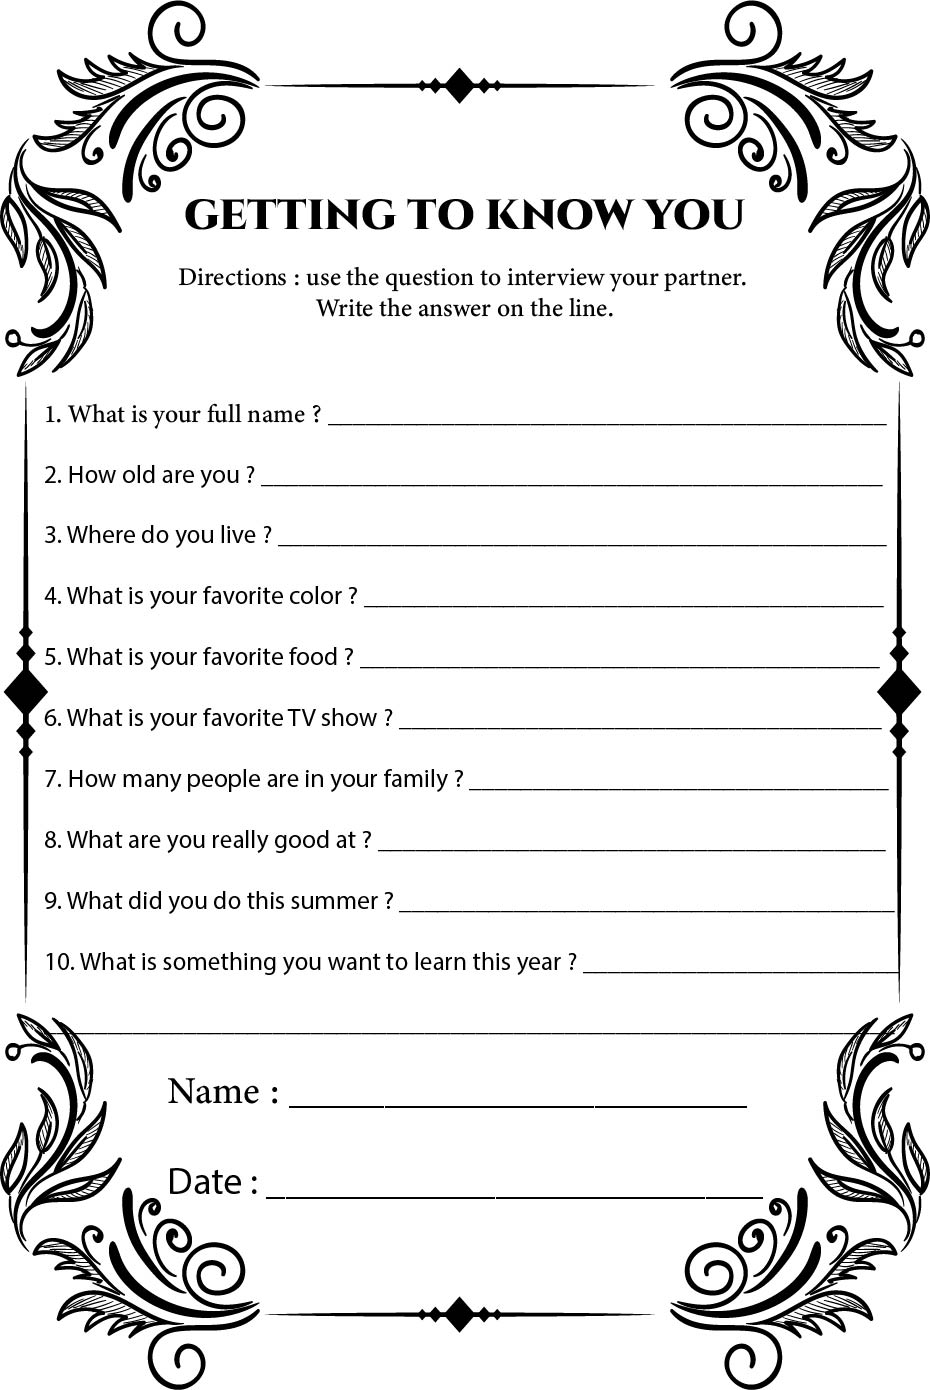 getting-to-know-you-questionnaire-worksheet-activity-sheet-sexiz-pix